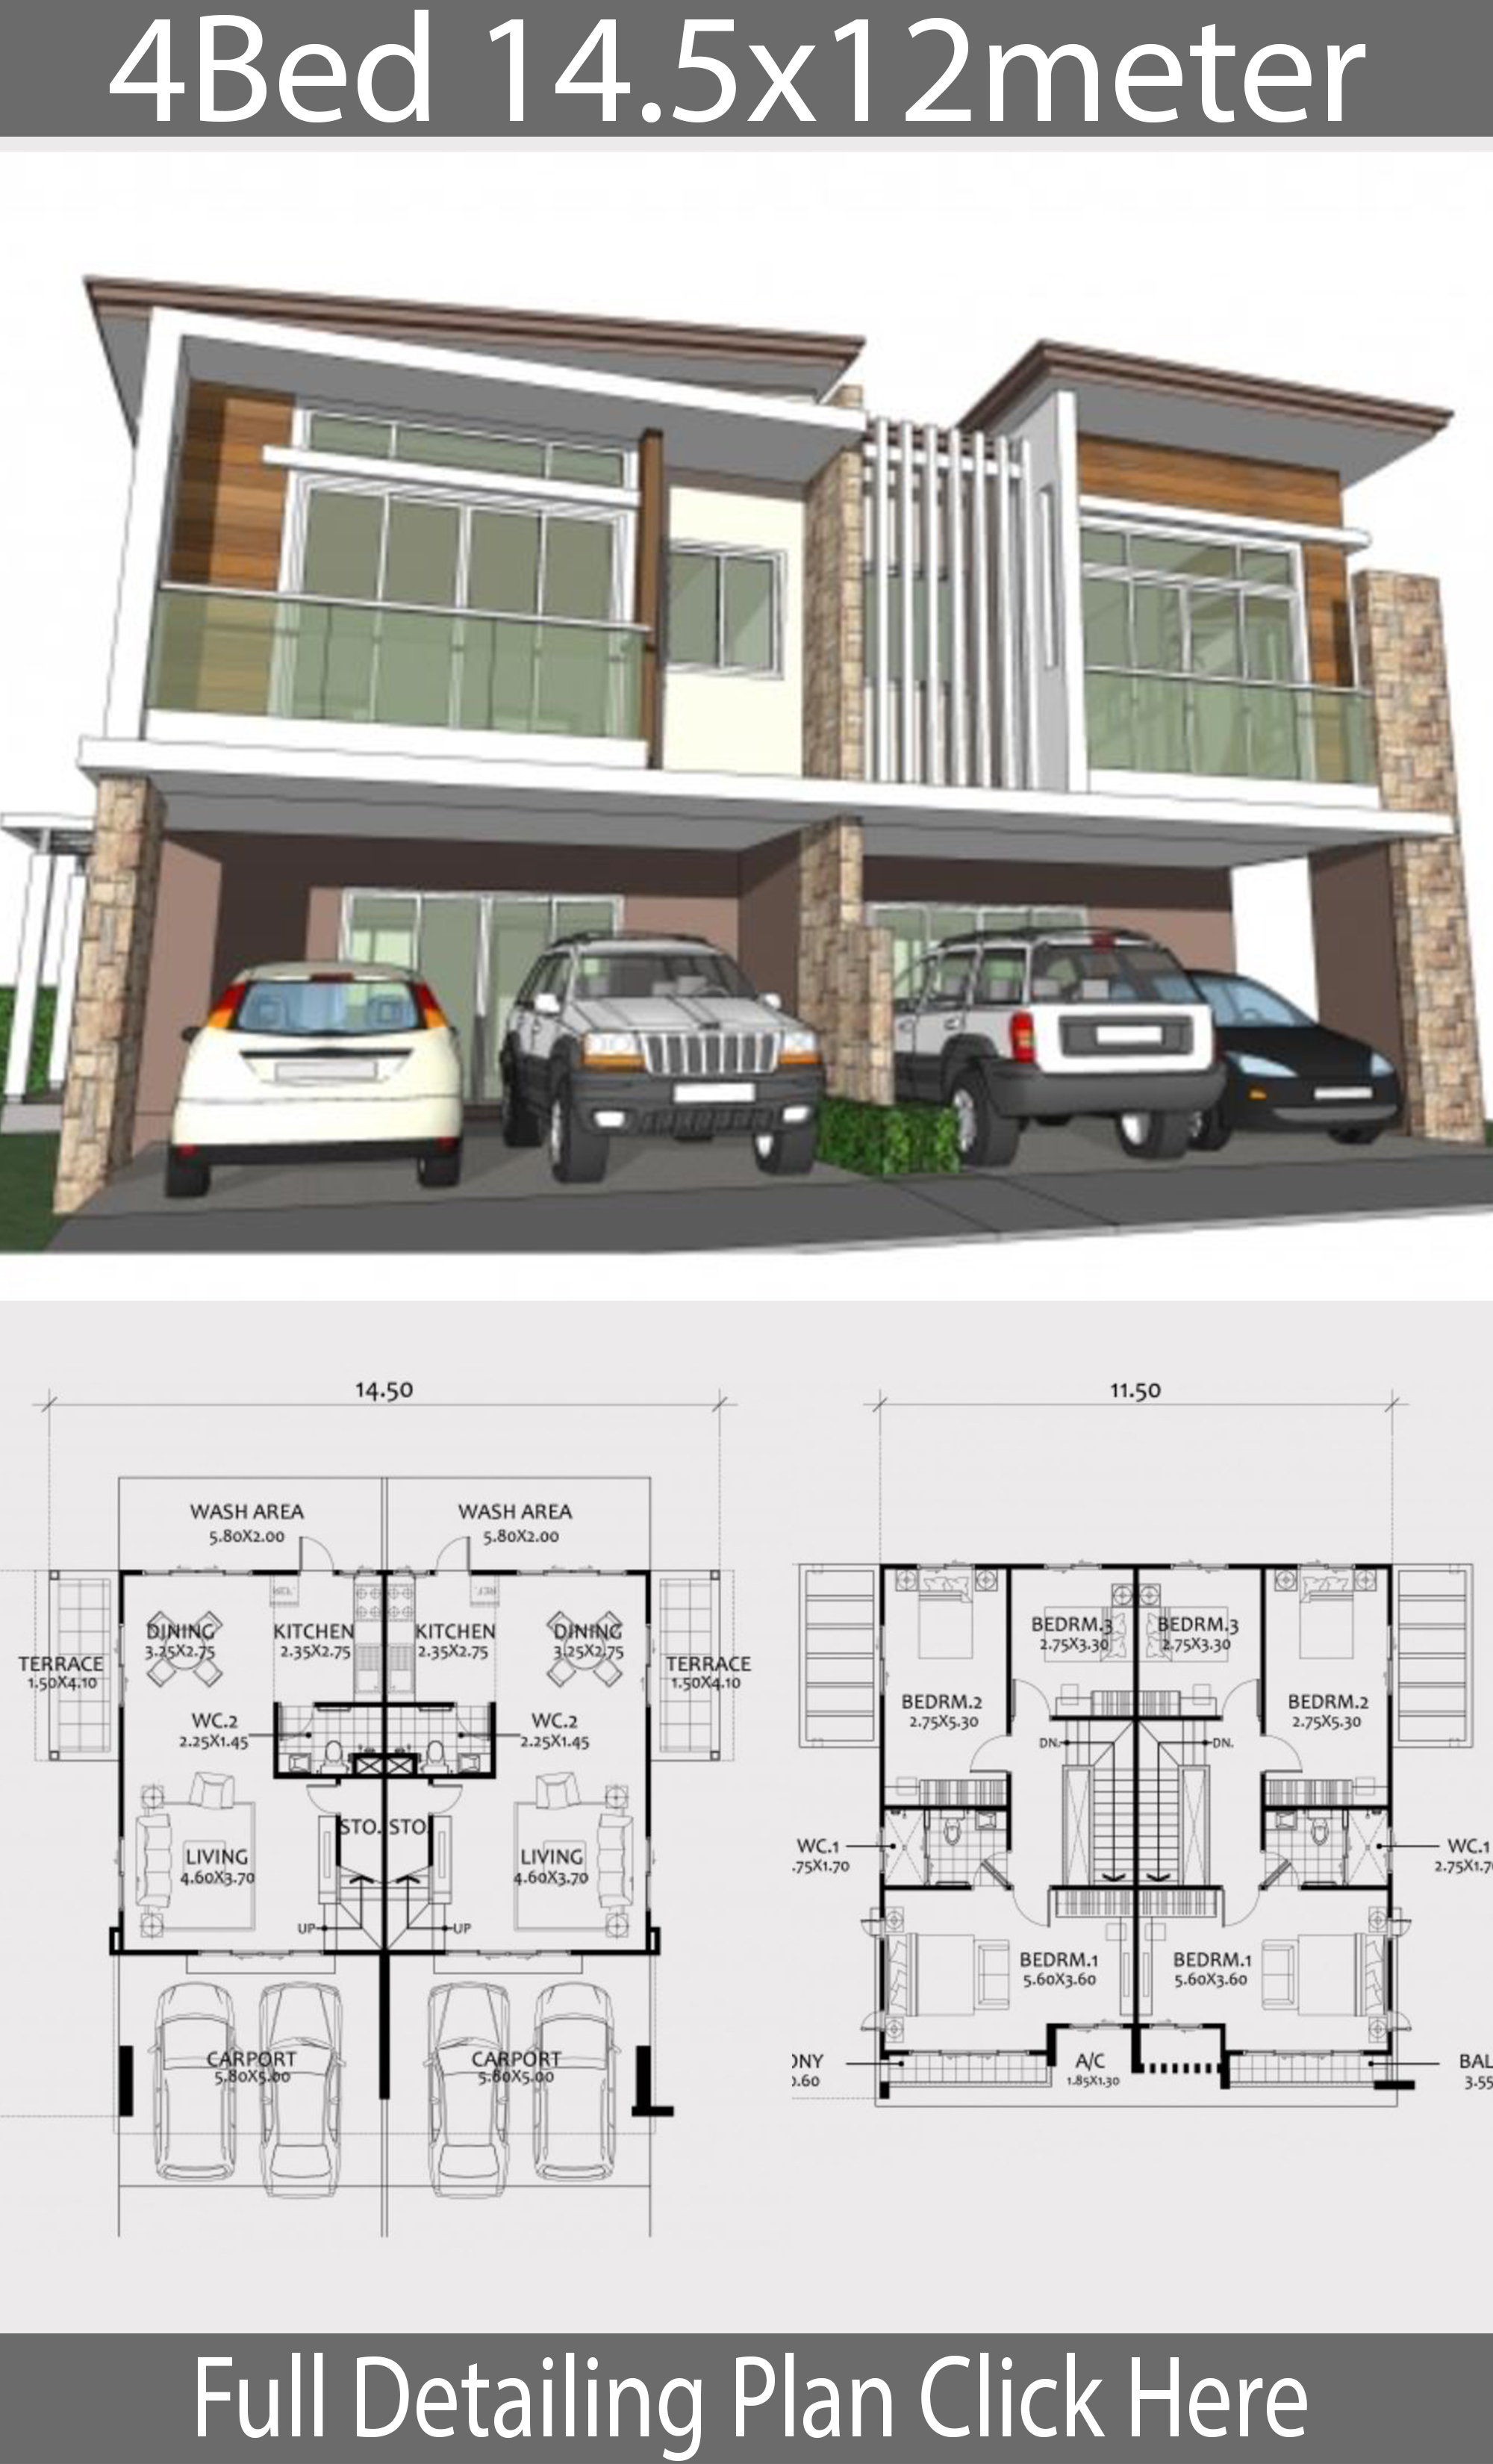 Twin house design plan 14.5x12m with 6 bedrooms House